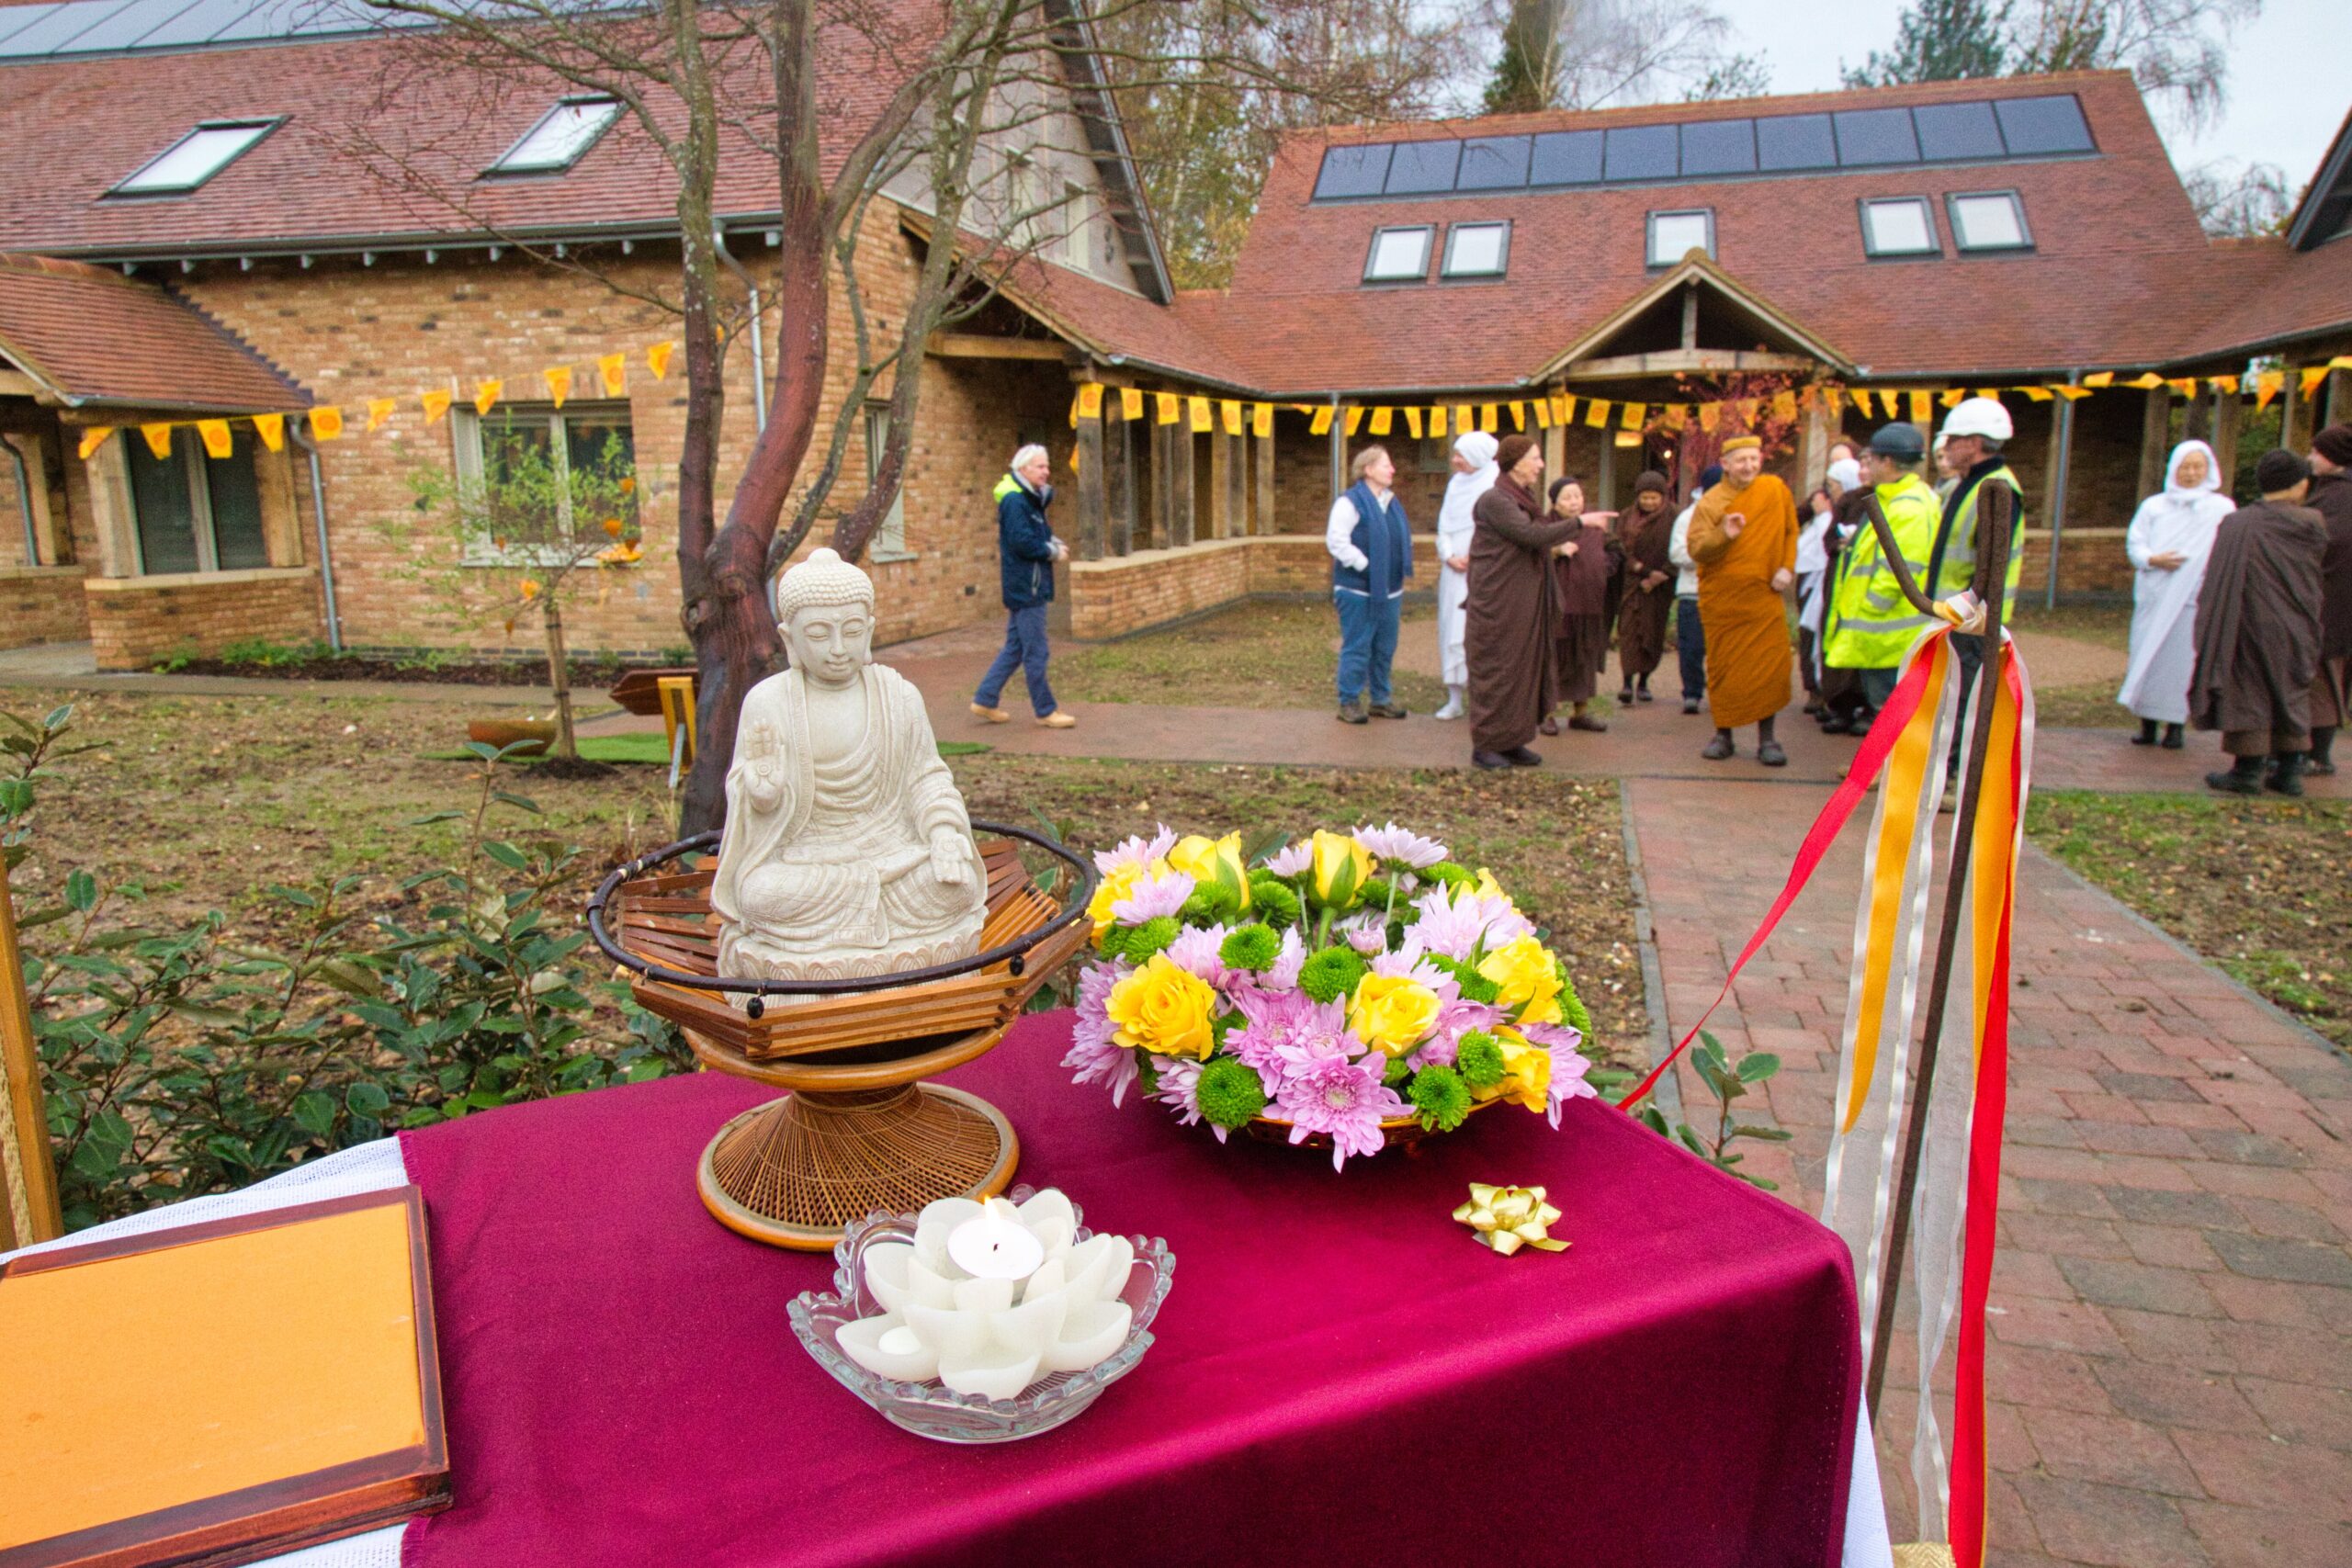 2022.11.24 Offering Of The Keys Ceremony For The Nuns’ Accommodation Building